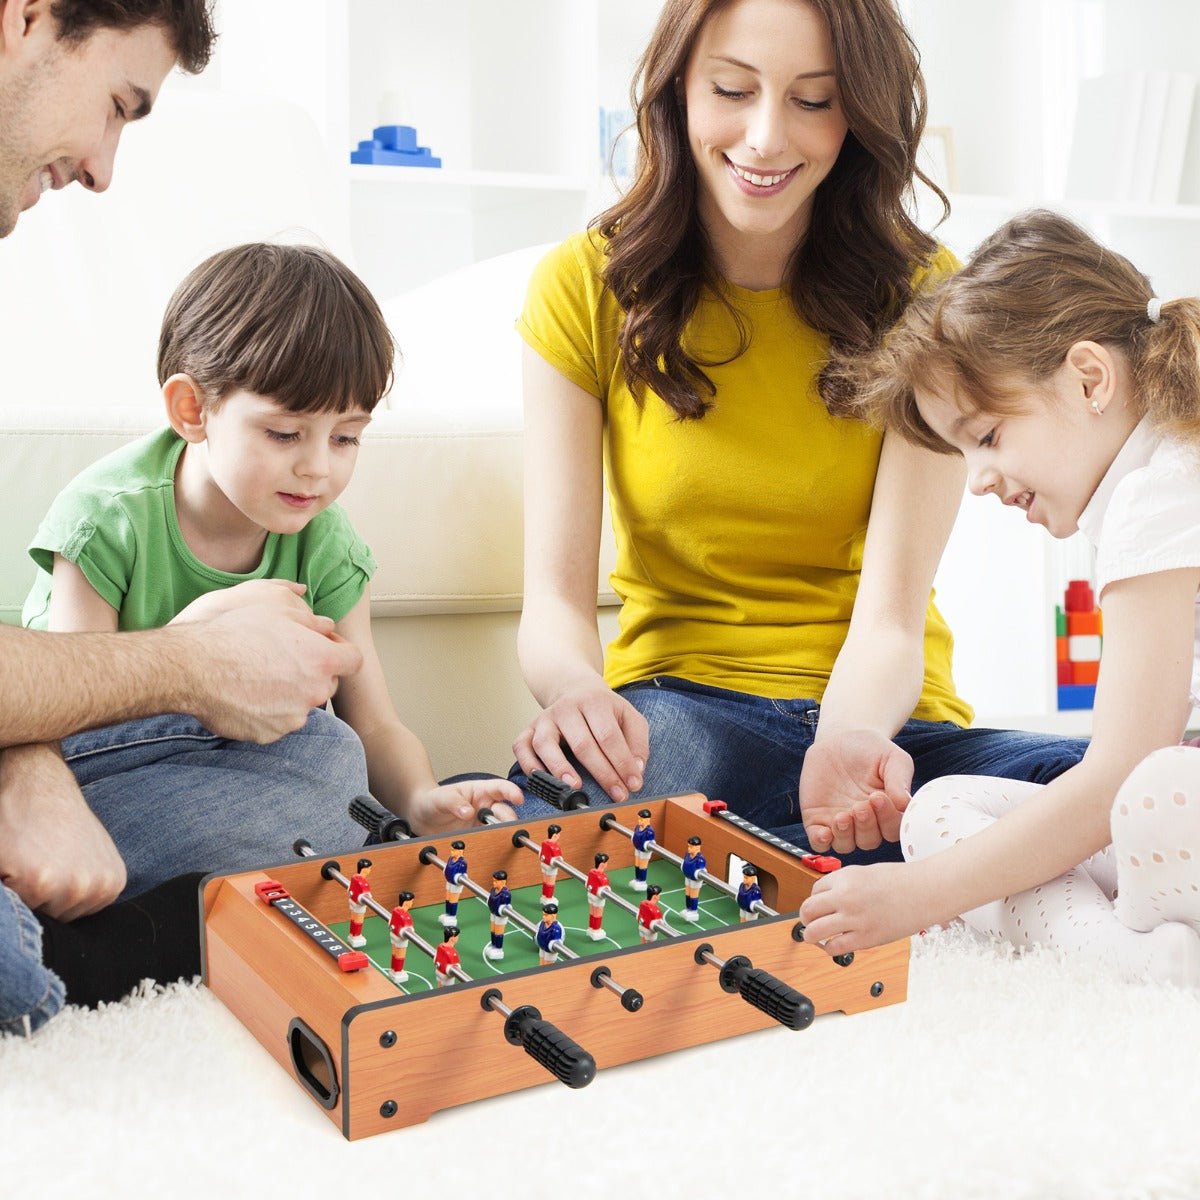 5Cm Tabletop Foosball Game - Fun for All Ages in Game Room